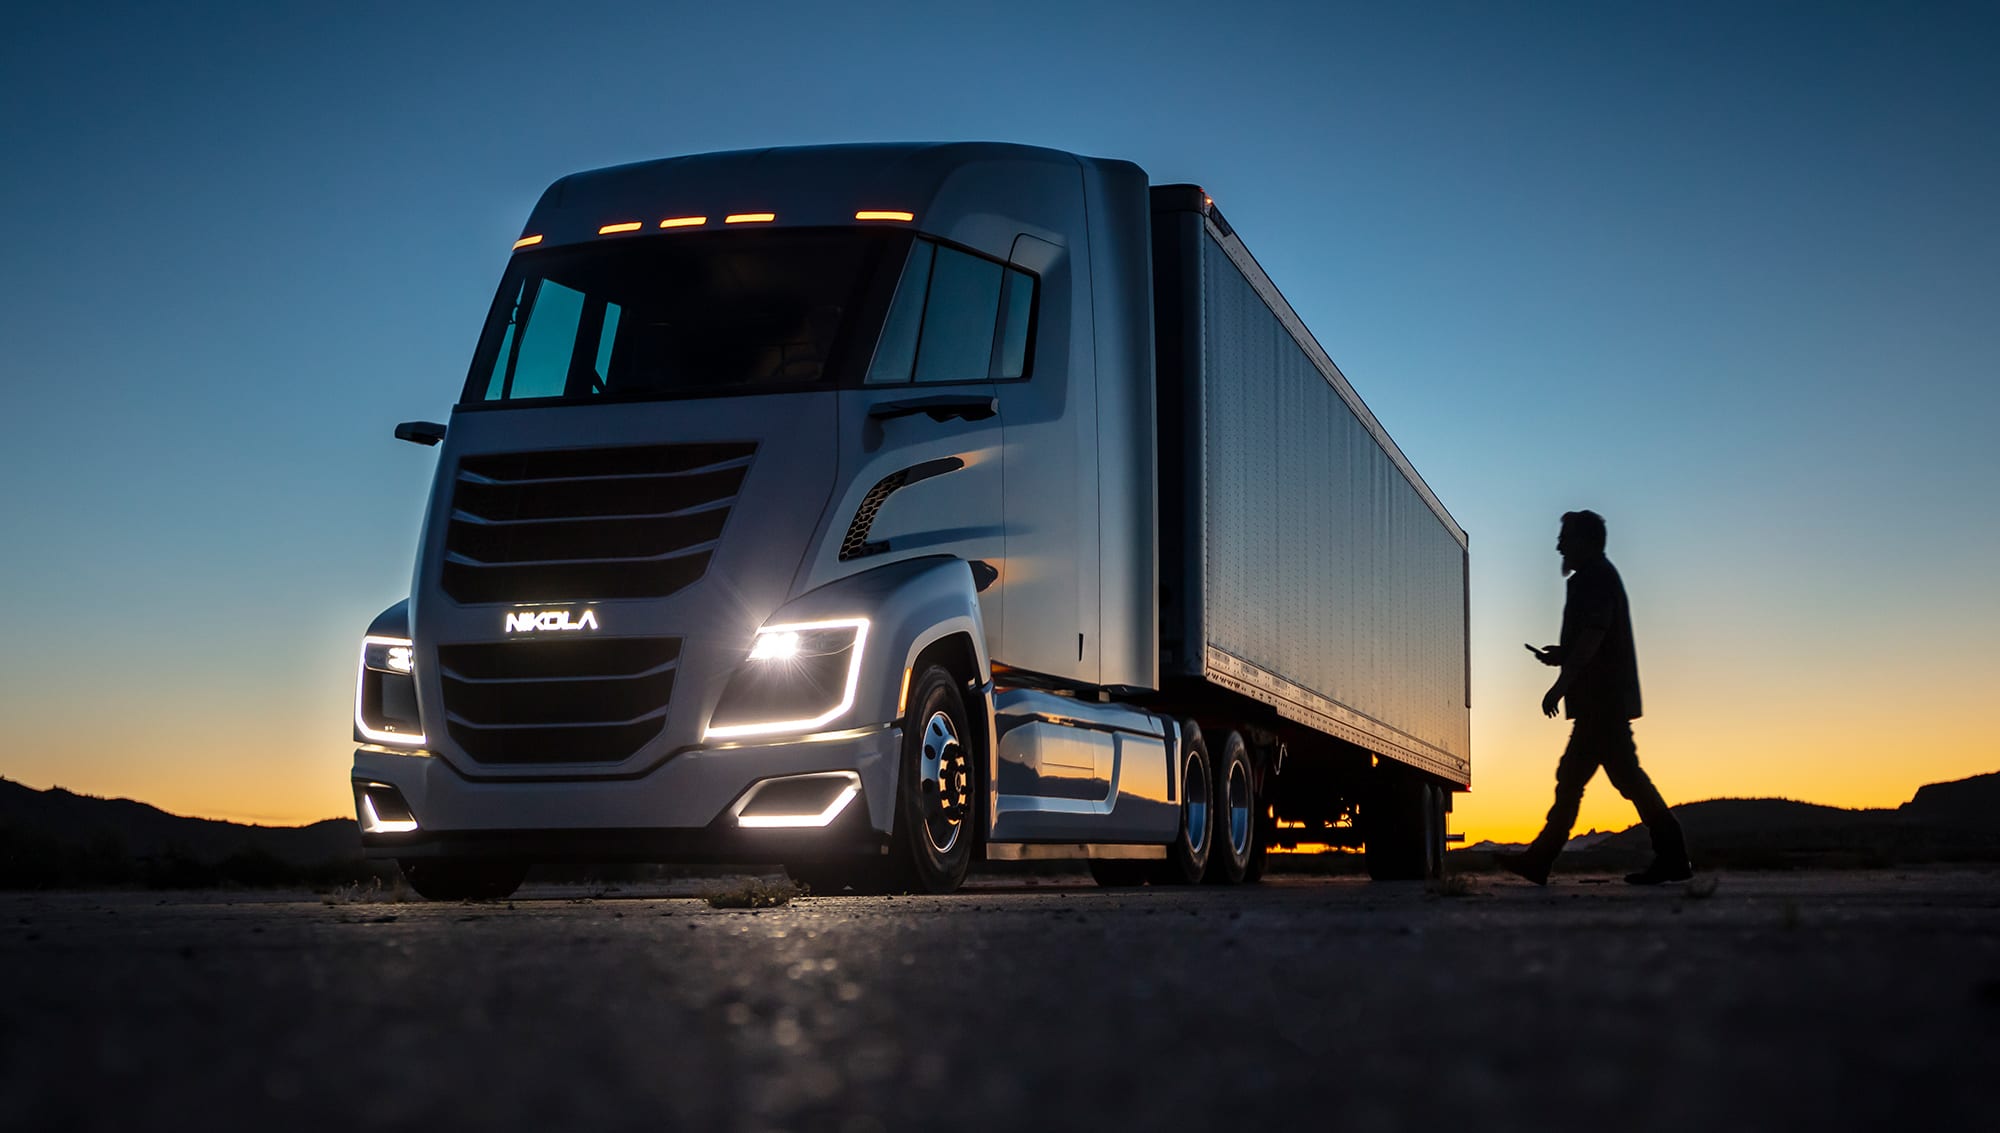 Nikola shares fall after CEO fails to reassure buyers GM will not pull out of $2 billion deal